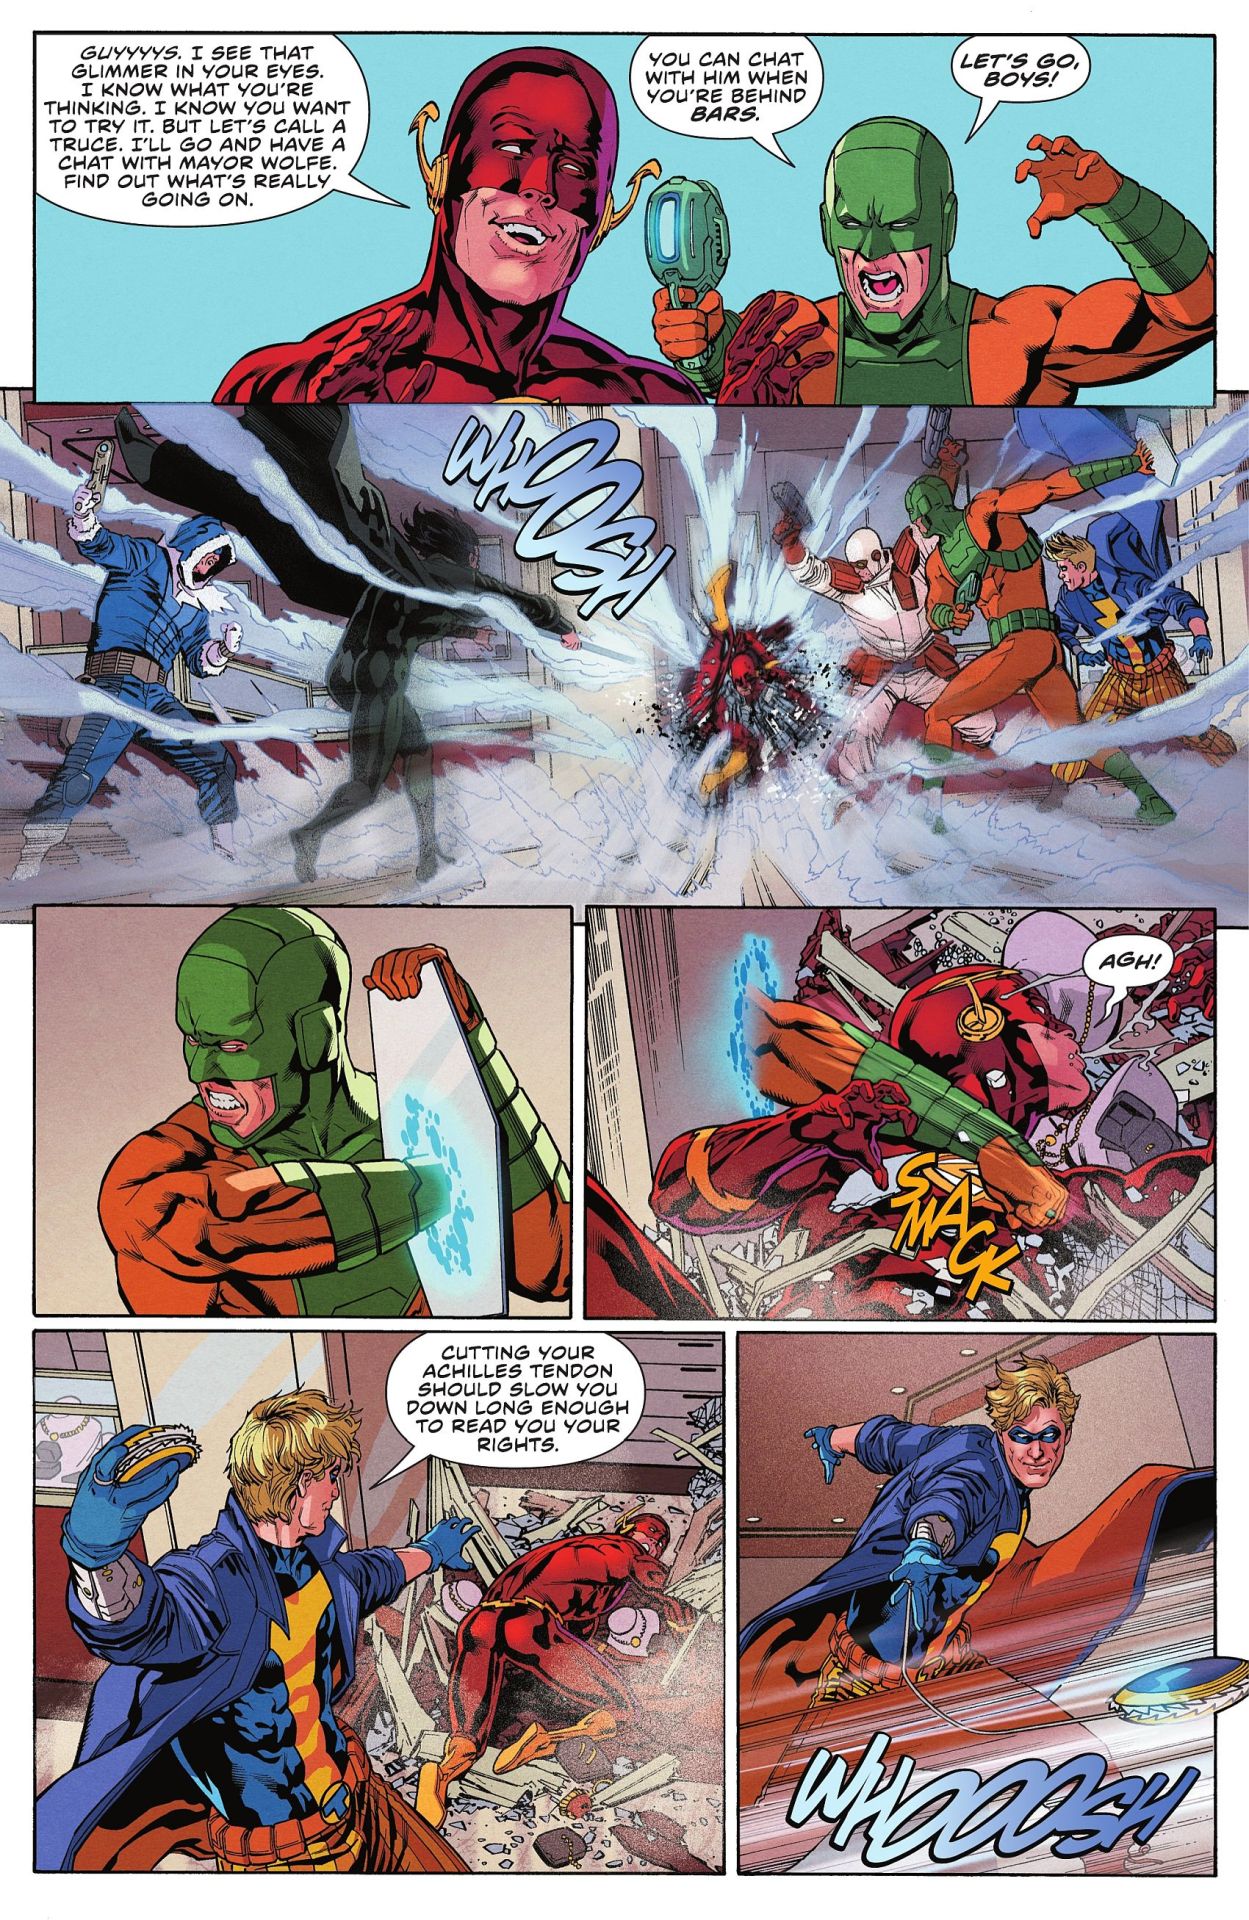 Review - The Flash #788: Rogues Rule - GeekDad